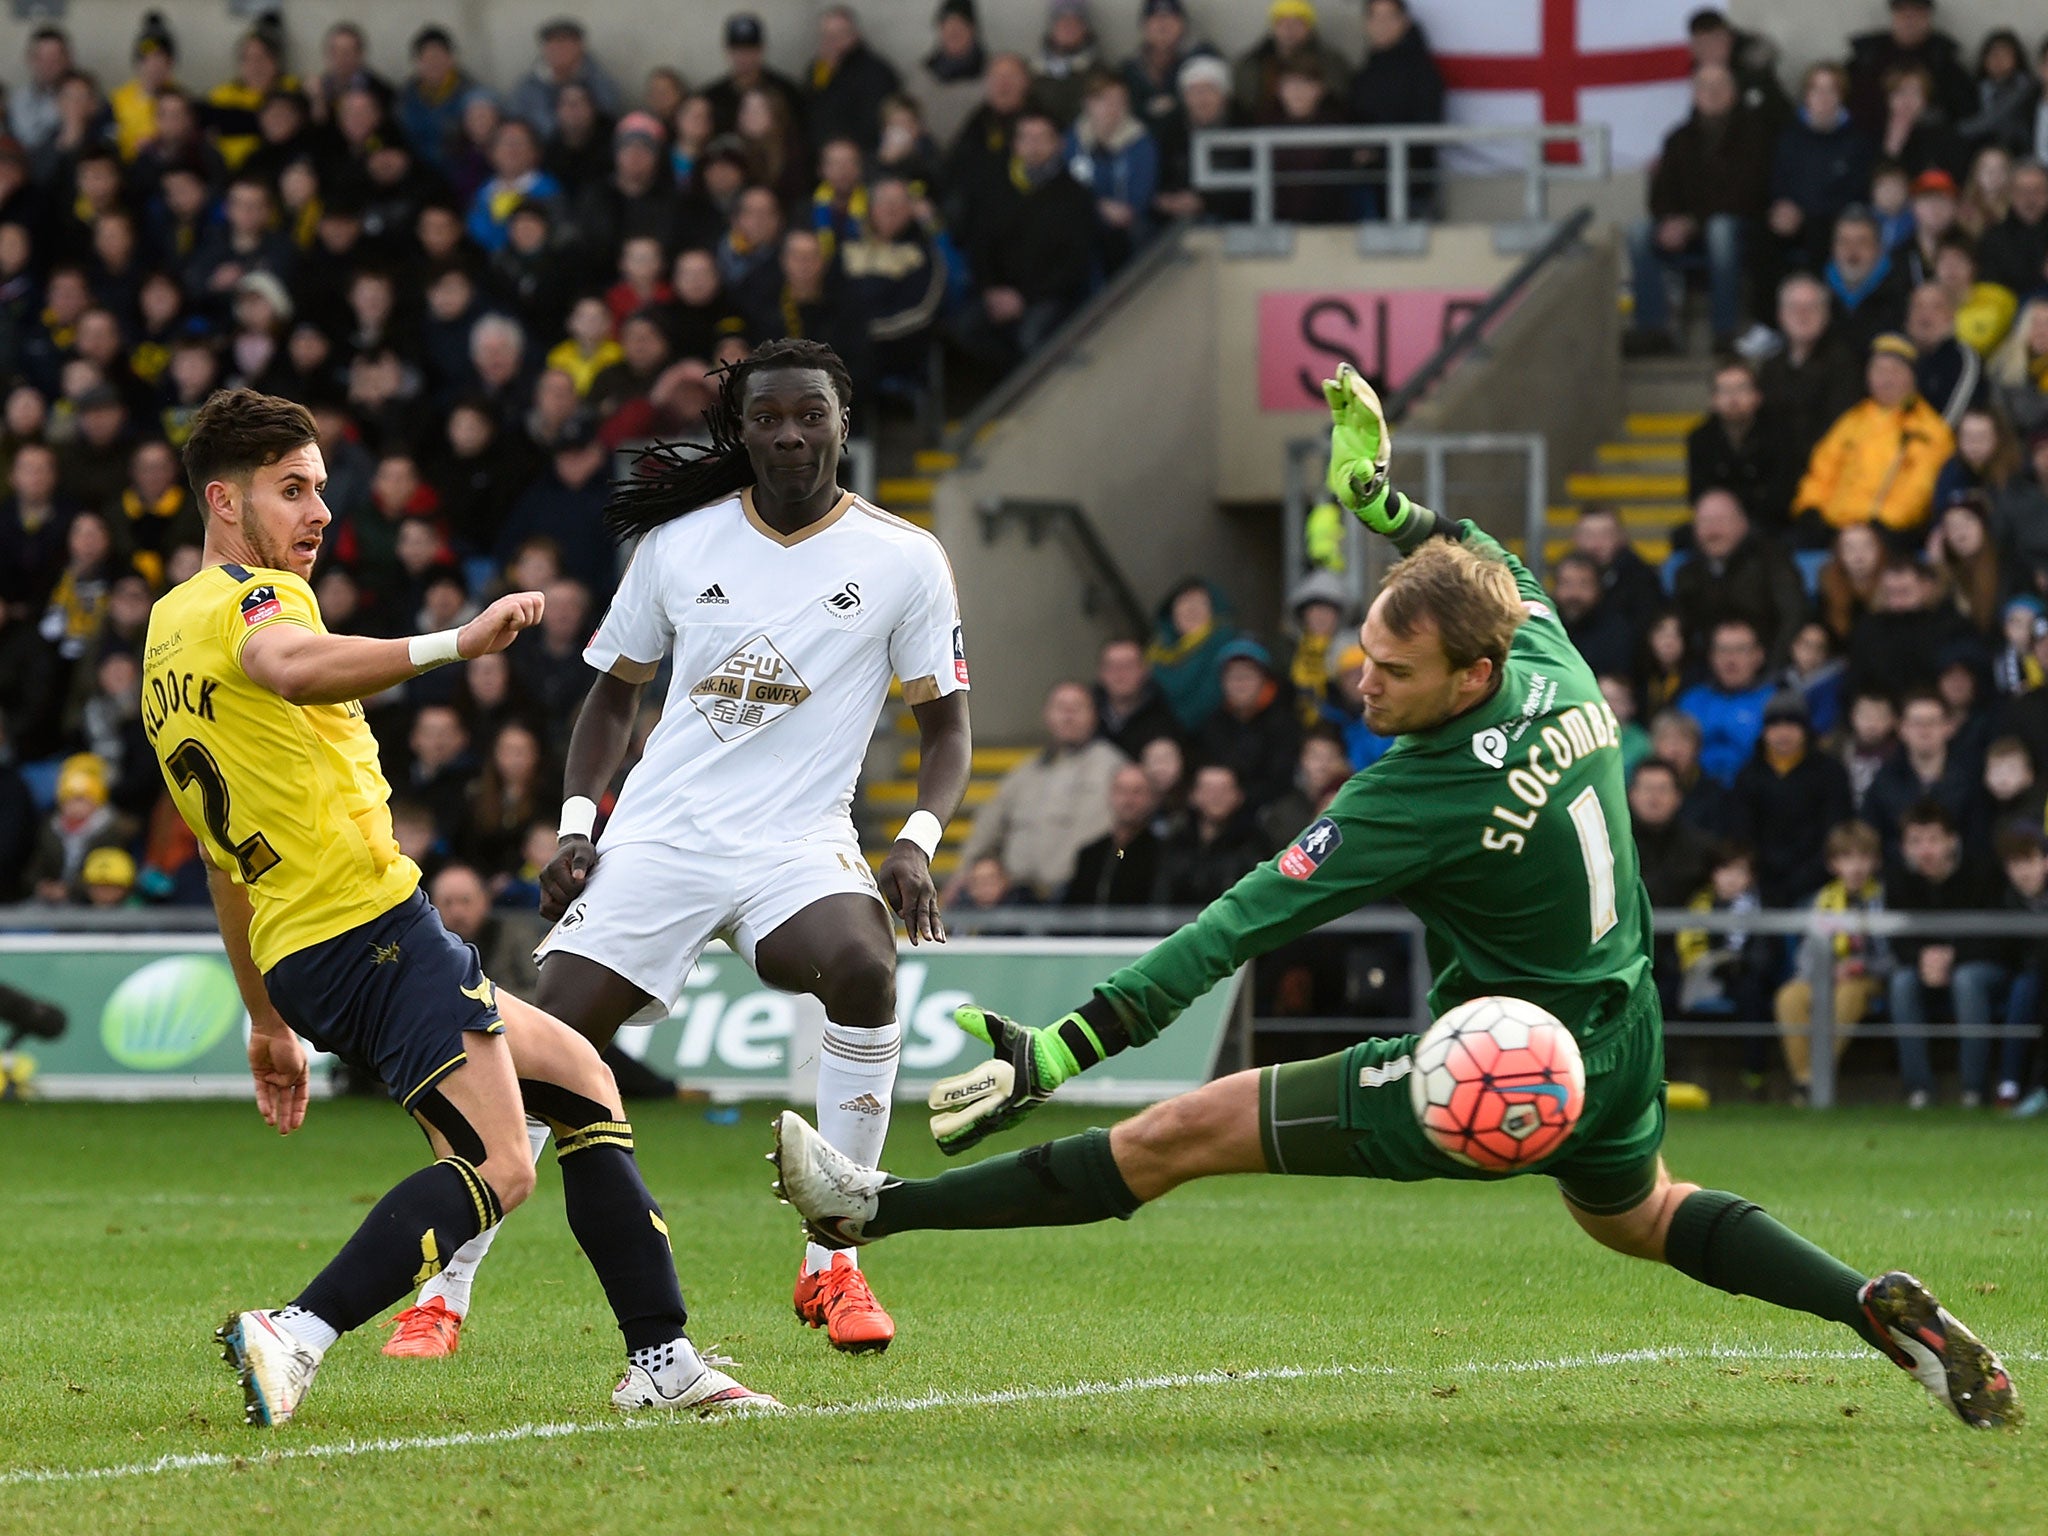 Bafétimbi Gomis, centre, pulls the scoreline back to 3-2 to give Swansea hope